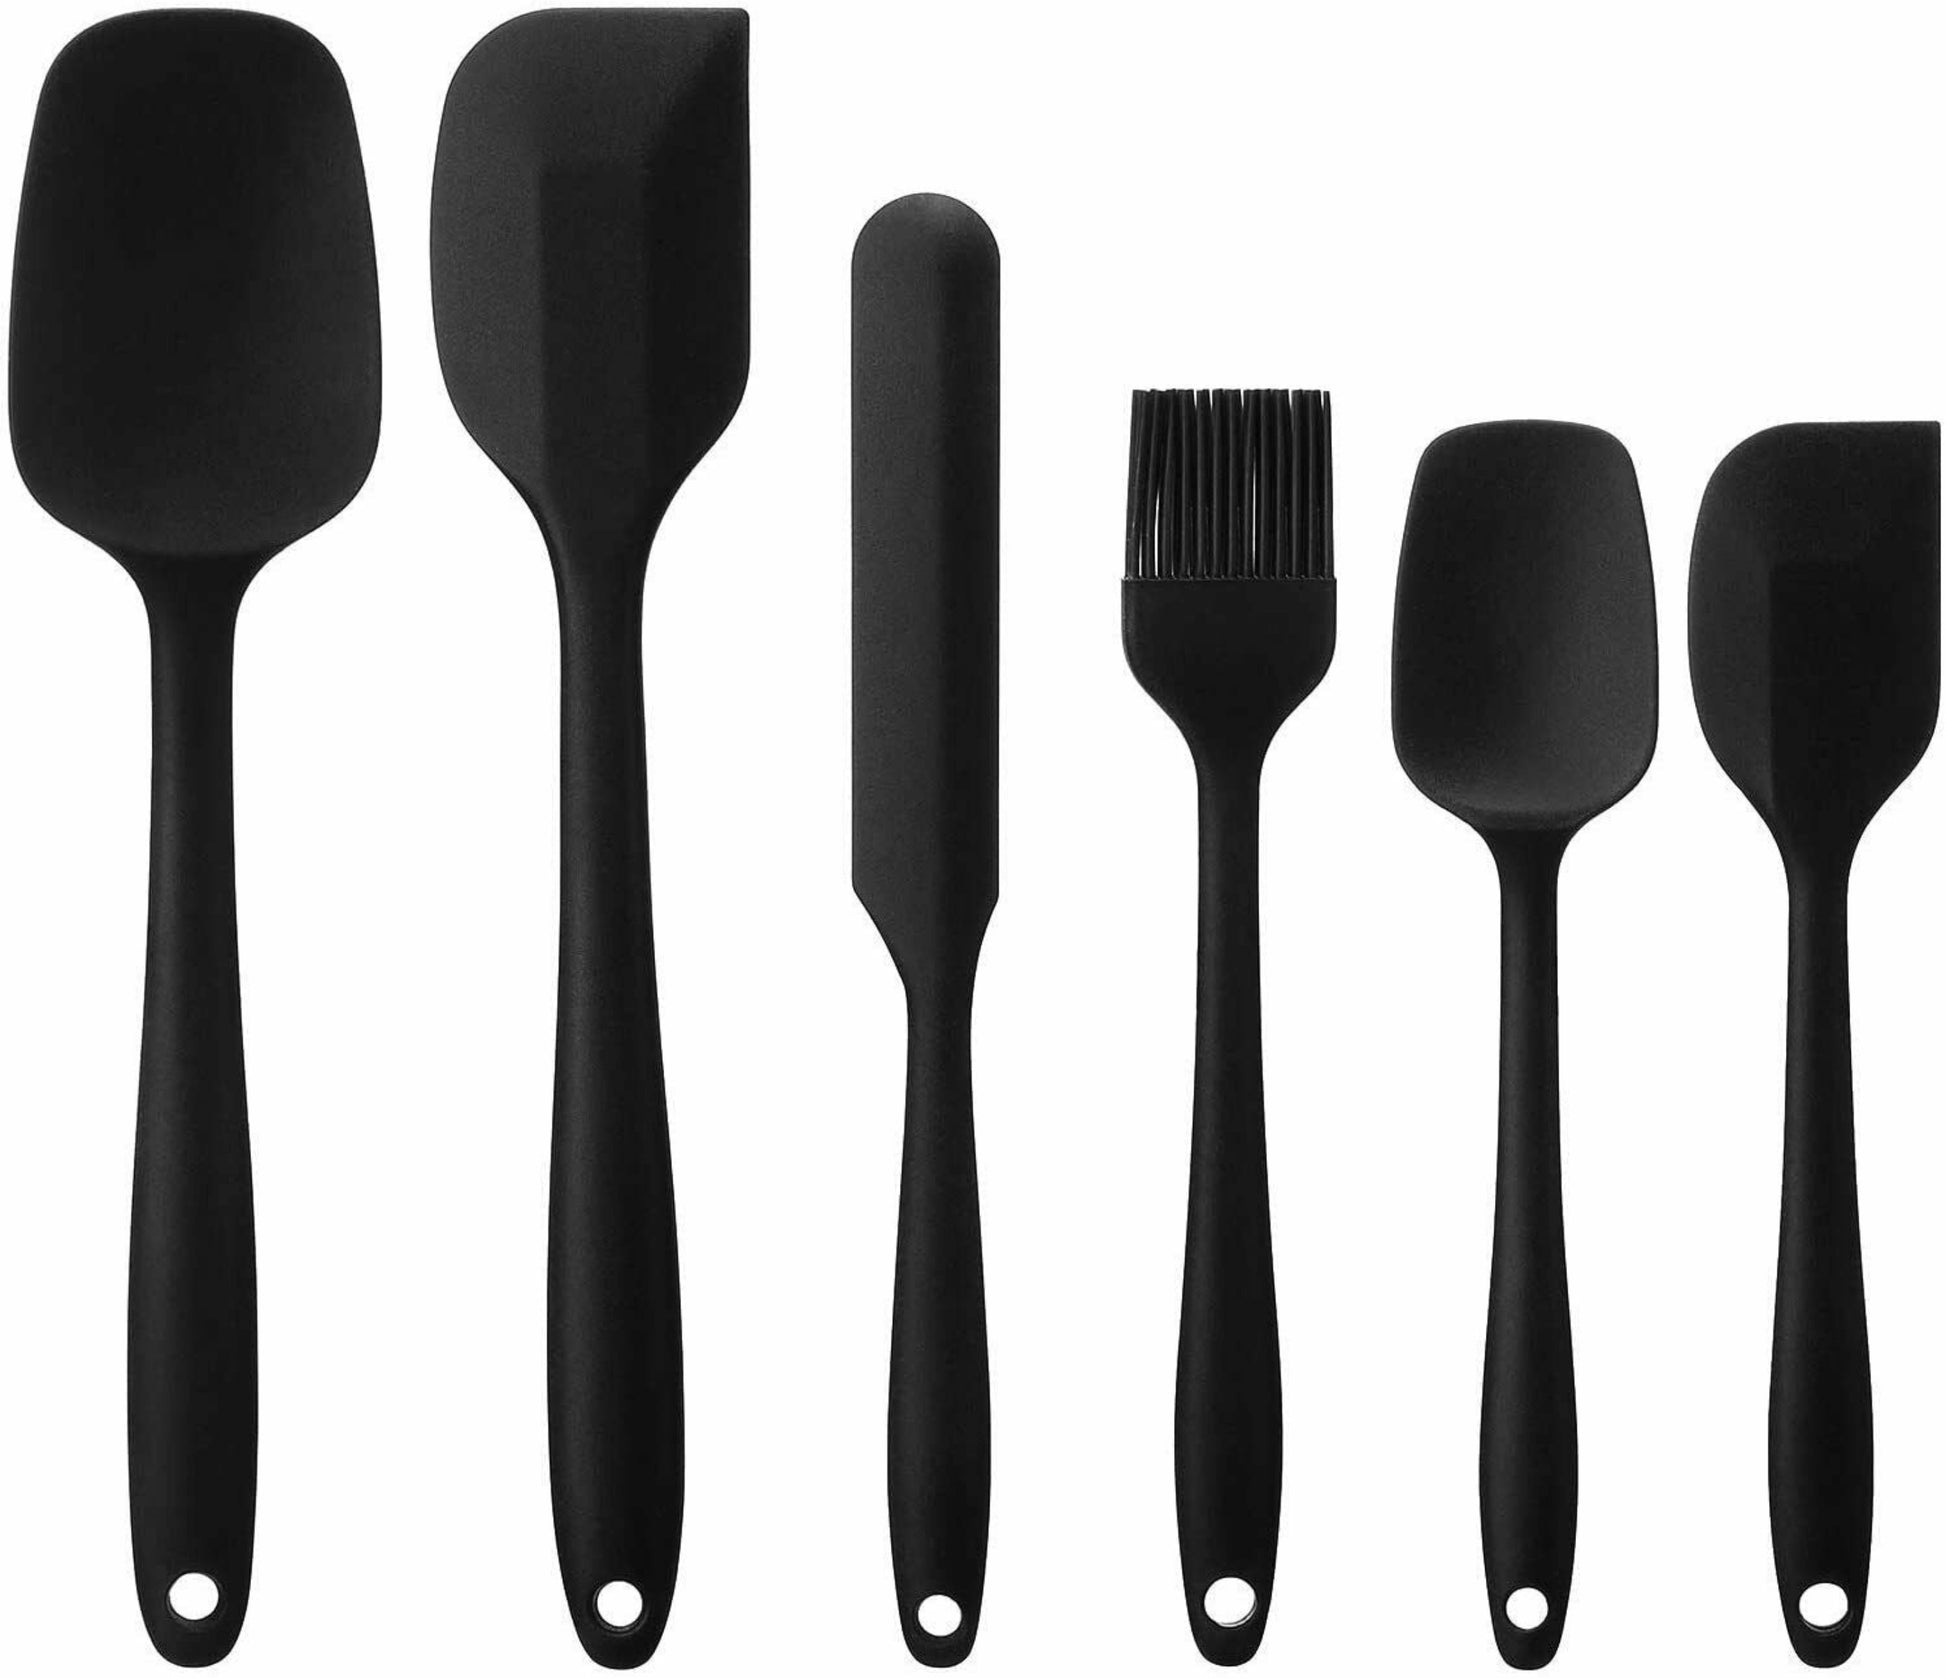 6PCS Silicone Cooking Utensils Set , Heat Resistant,Baking & Serving  Silicone Cooking Utensils,Kitchen Tools Gadgets for Nonstick Cookware  (White)